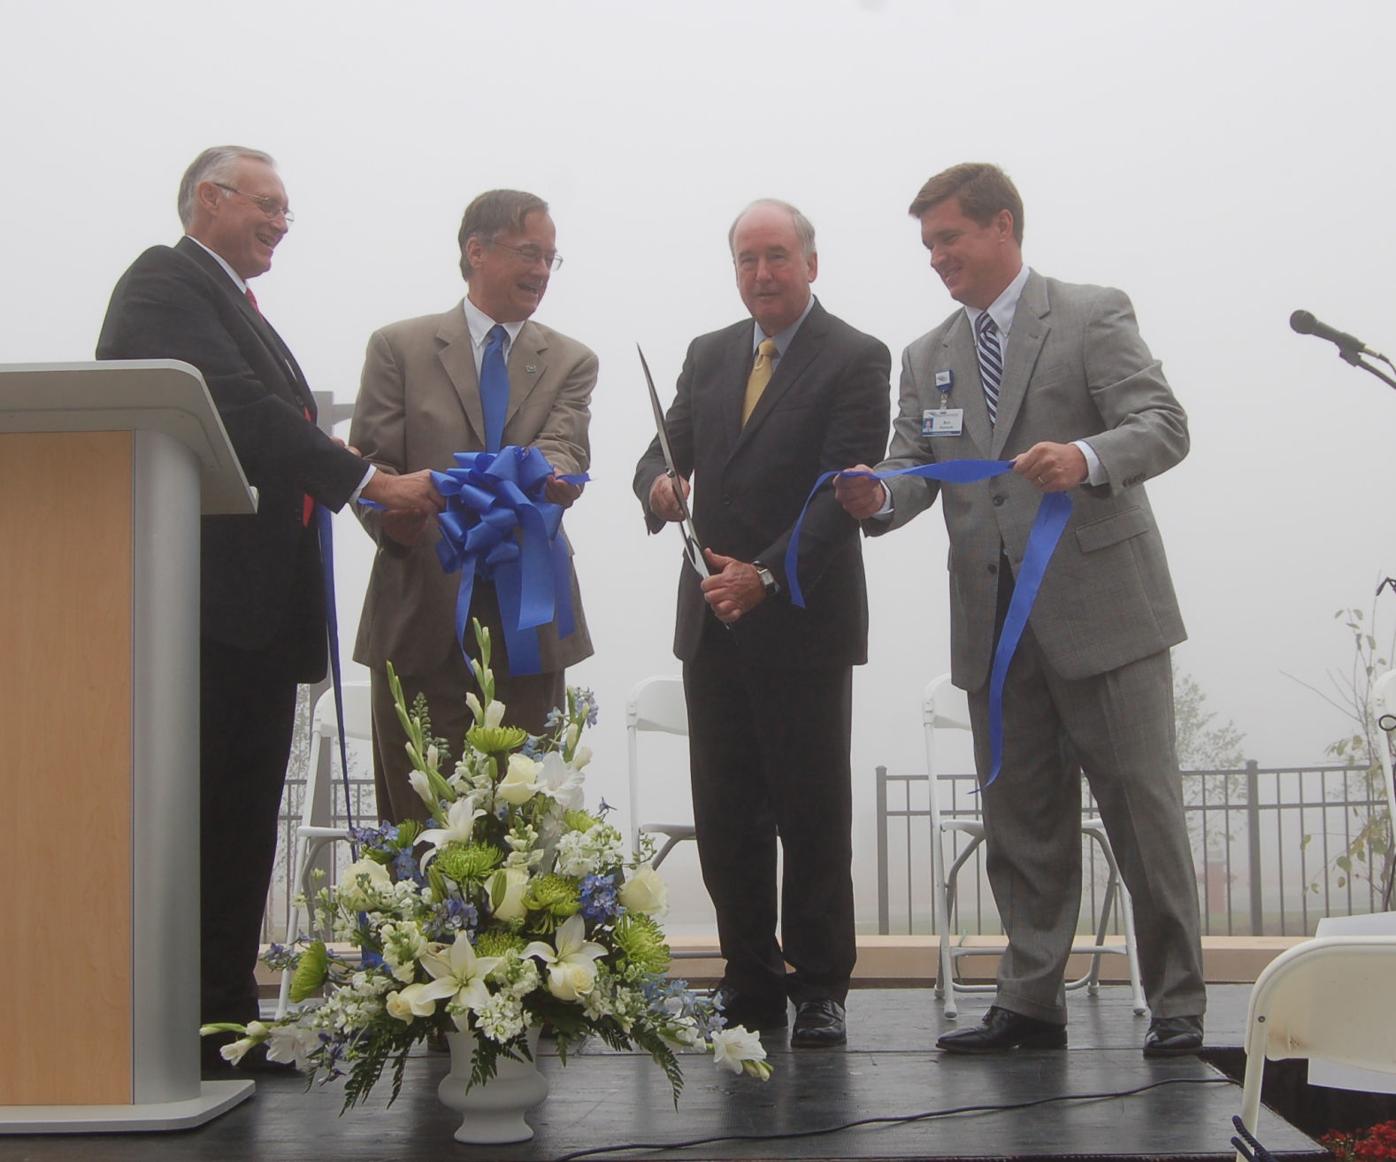 The cutting of the ribbon